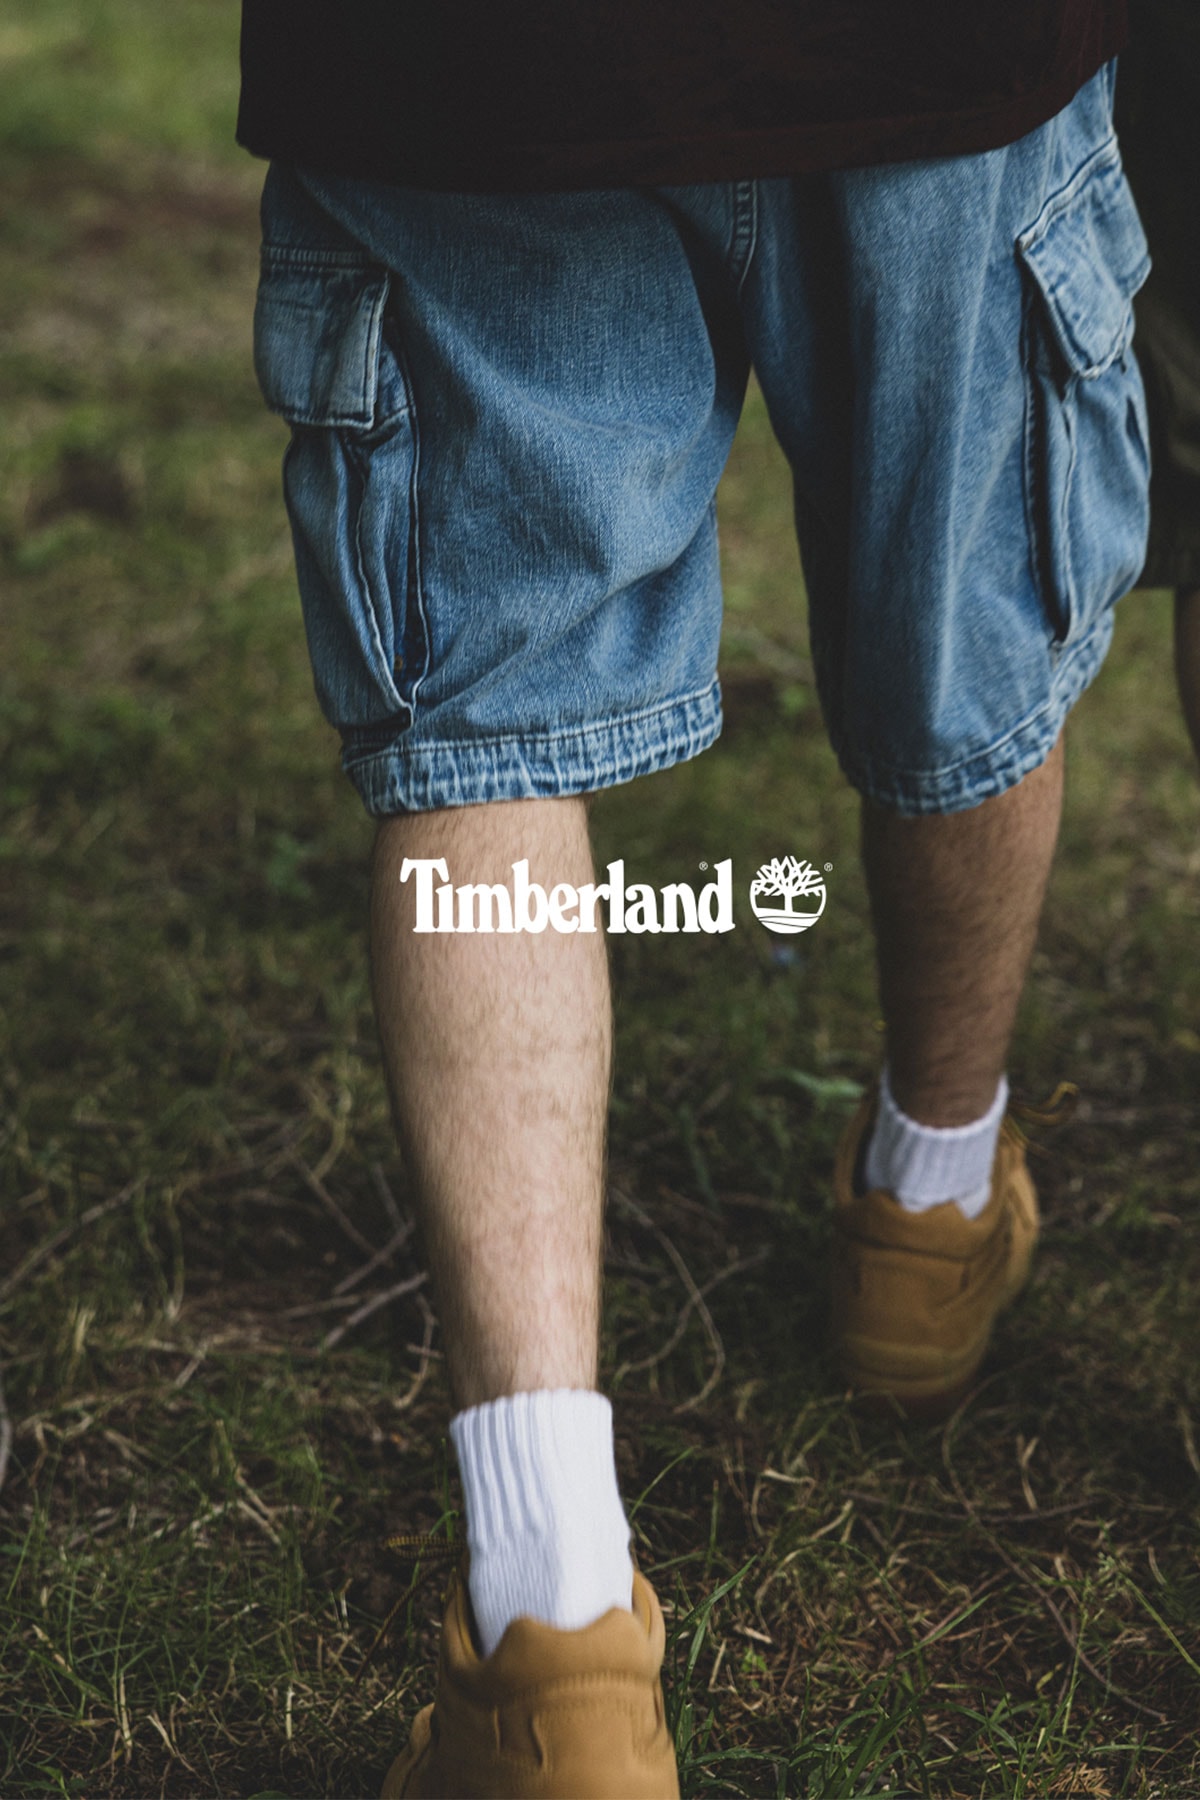 BEAMS Timberland Moc Toe Collaboration release information details date archive Japan gore tex